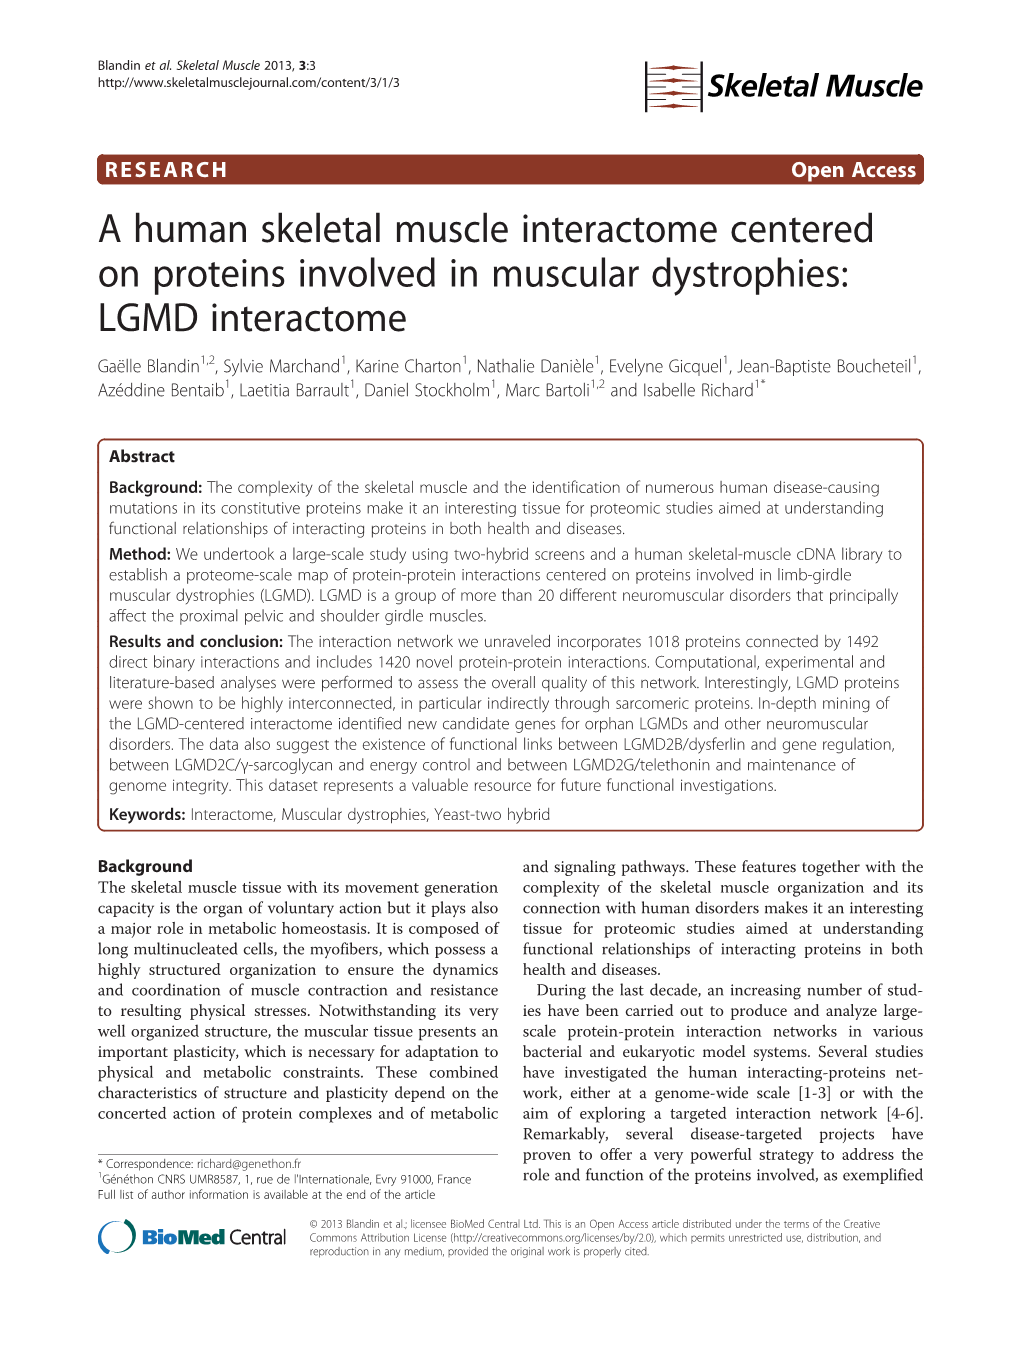 A Human Skeletal Muscle Interactome Centered on Proteins Involved in Muscular Dystrophies